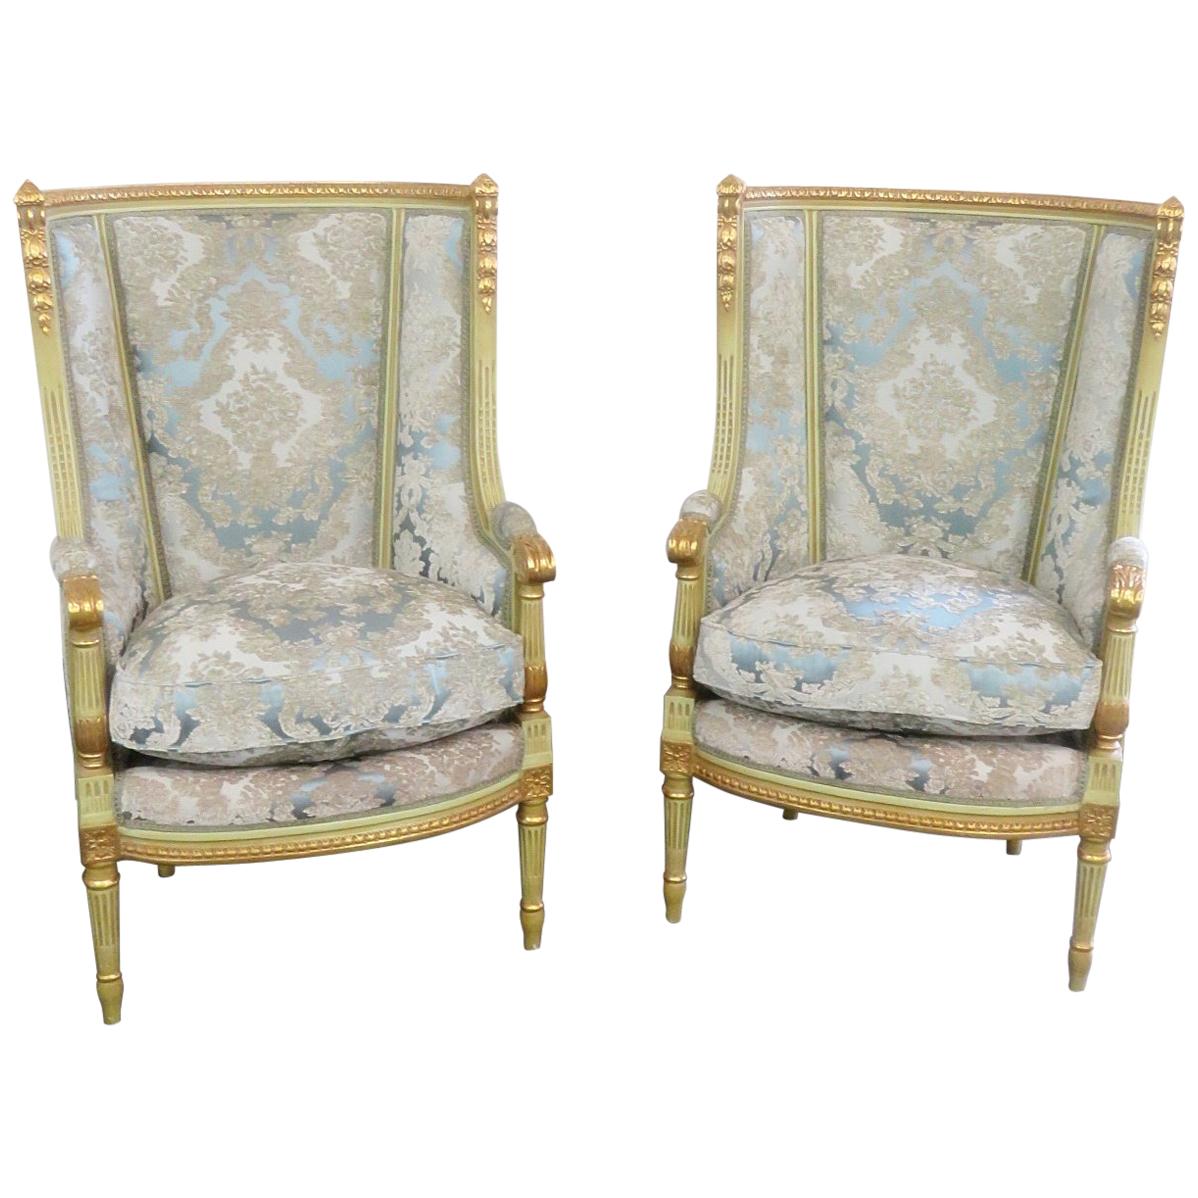 Pair of Louis XVI Style Paint Decorated Wing Back Chairs